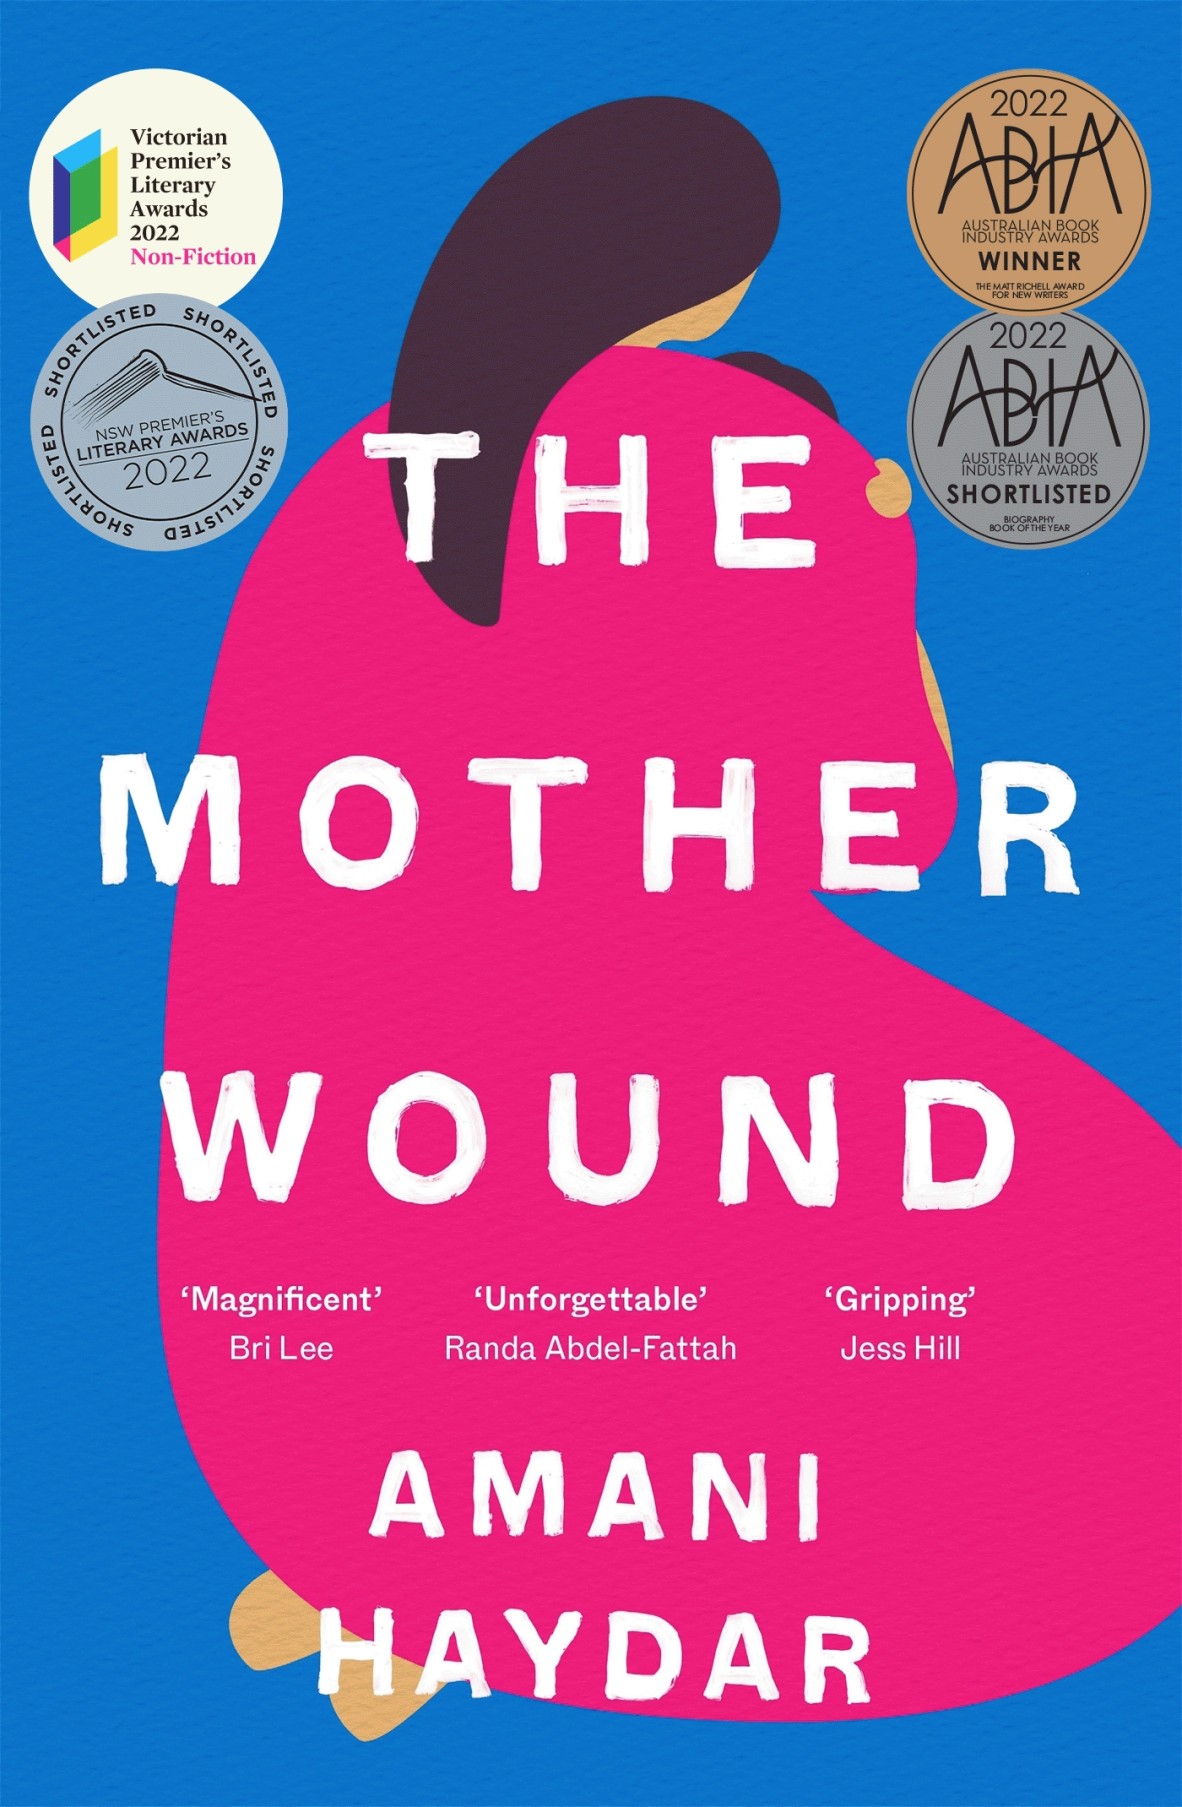 Cover of The Mother Wound by Amani Haydar It is a blue book showing a dark haired stylised woman in a pink dress holding an infant